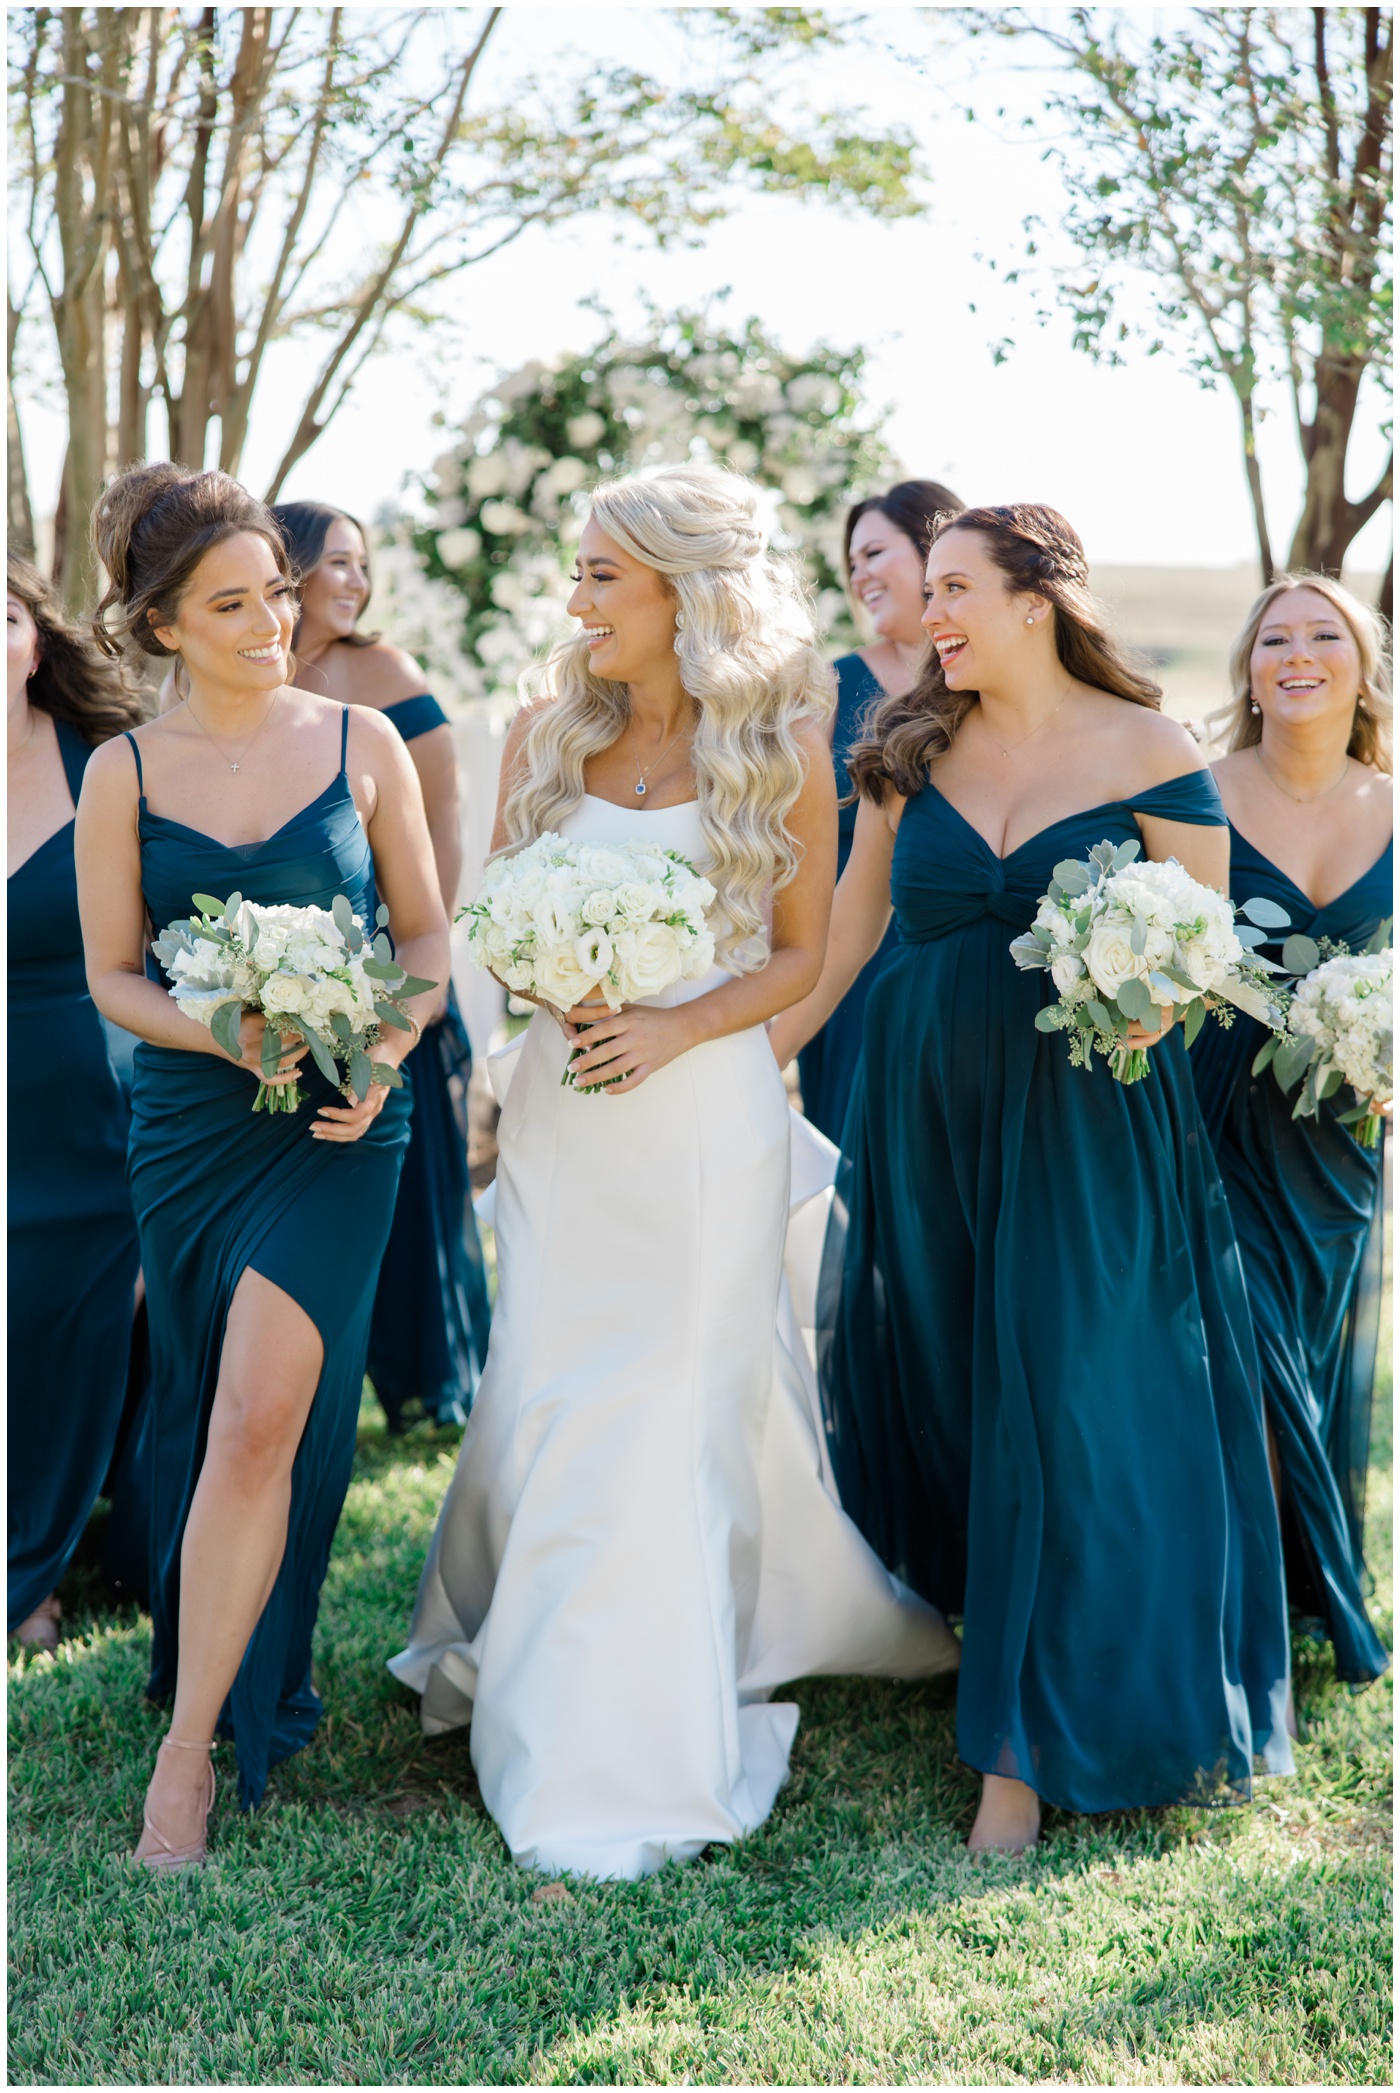 Houston Wedding Photographer | A bride and her bridesmaids